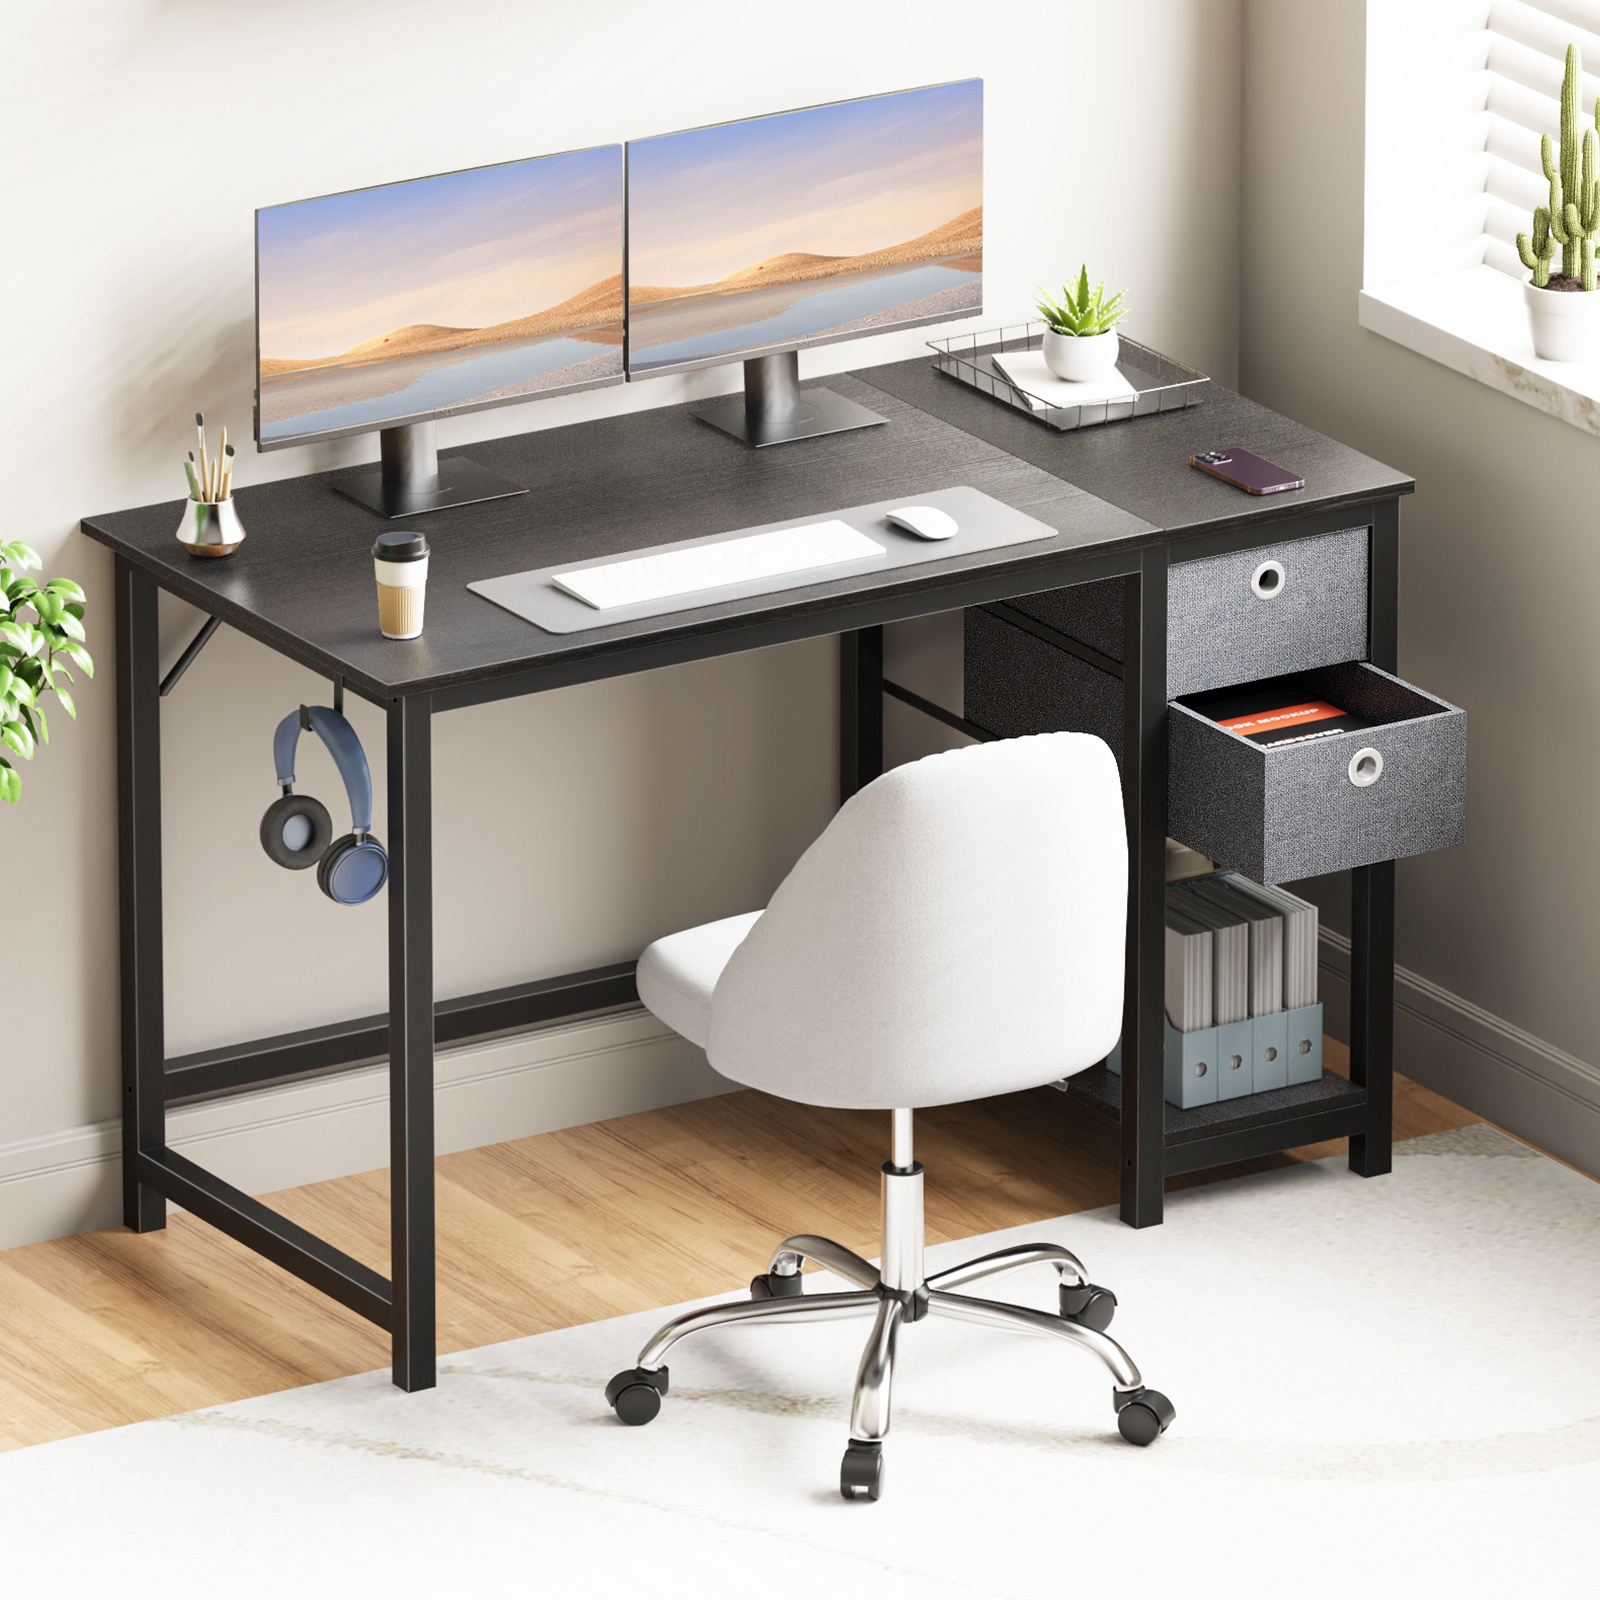 

Modern Sturdy 40/47-inch Computer Office Desk With Fabric Storage Drawers, Headphone Hooks - Ideal For Home Office Workspace Gaming Desk